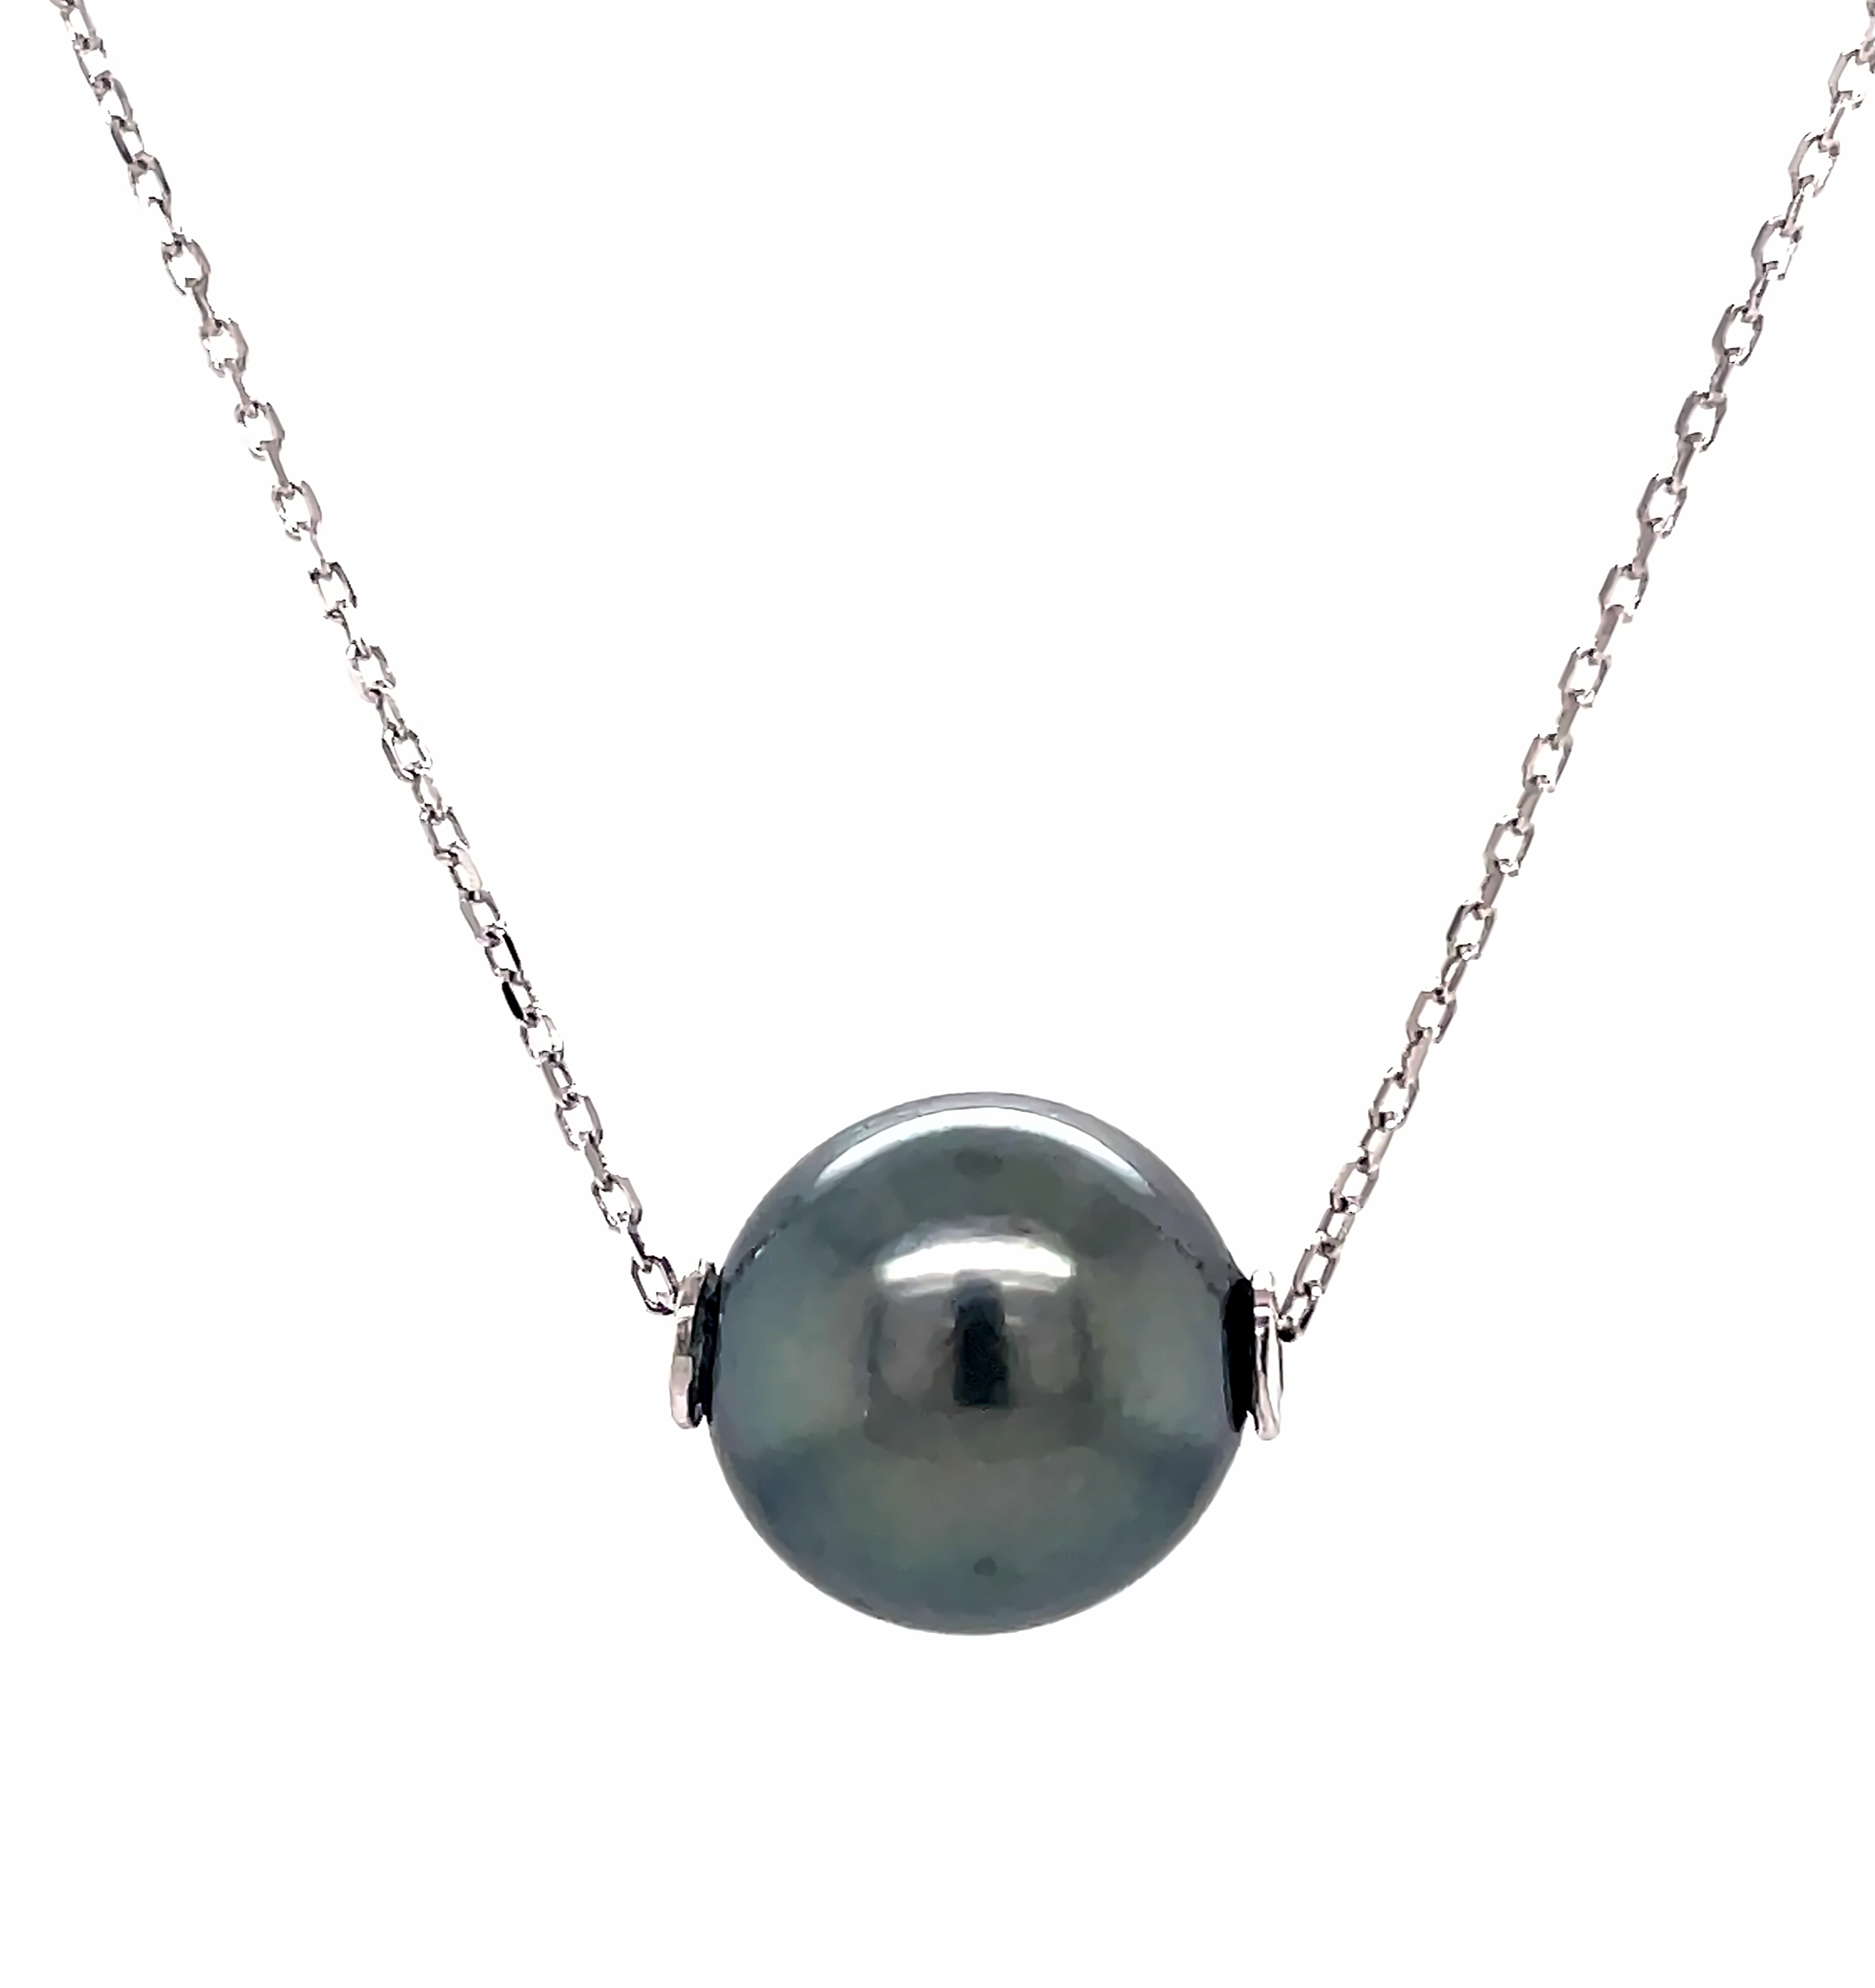 Tahitian pearl 13.00 mm  Good luster  14k white gold chain  17" long with sizing loop  Secure lobster catch